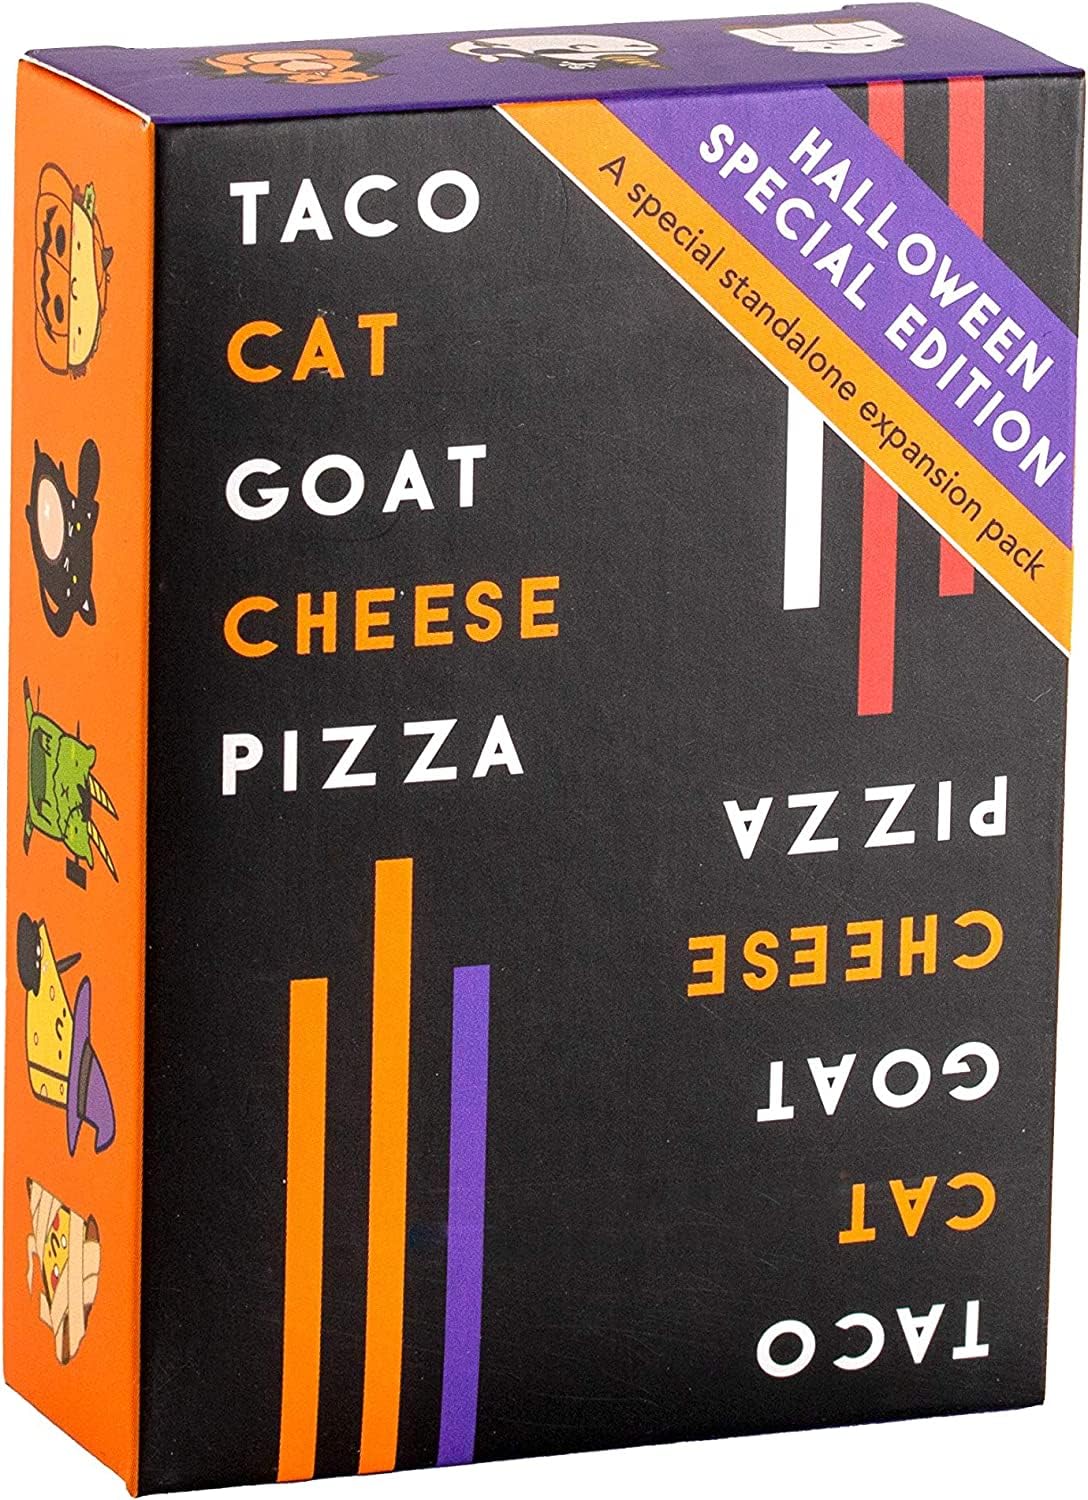 Taco Cat Goat Cheese Pizza – Halloween Edition – Halloween Party Games for Kids and Adults - Halloween Party Favors, Halloween School Party Prize, Trick or Treat Gift, Kids Ages 8+